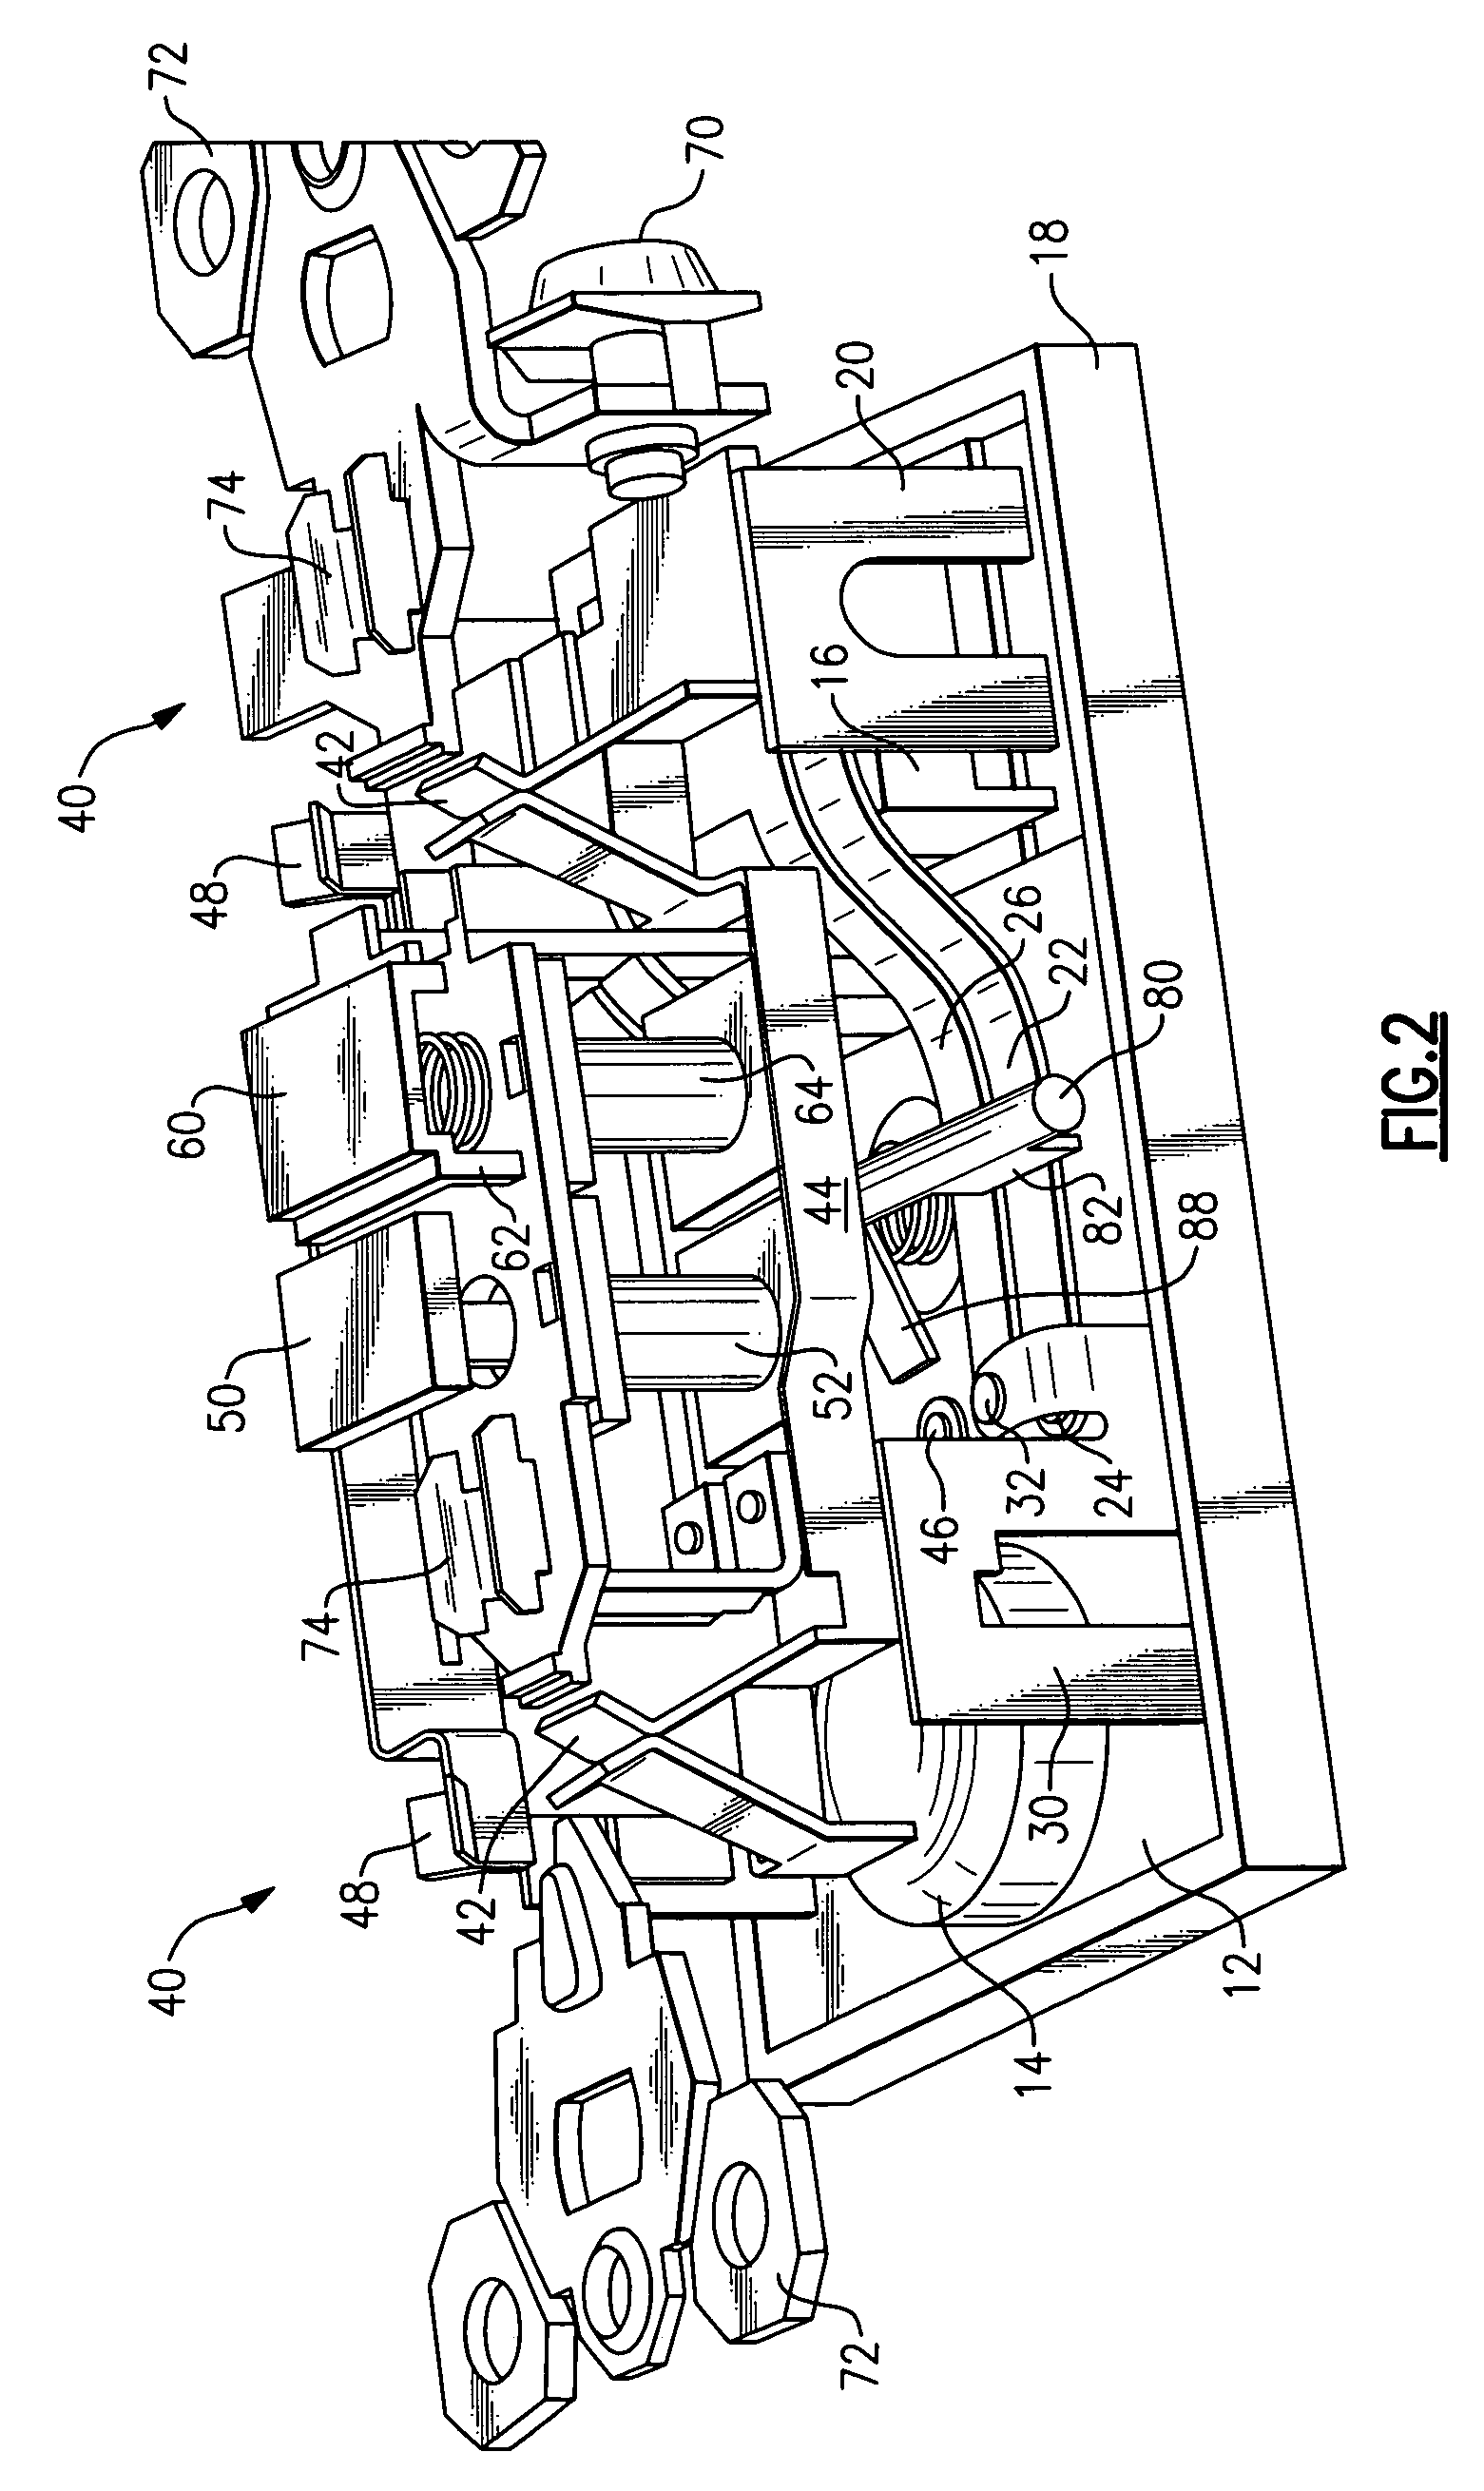 Protection device with a contact breaker mechanism